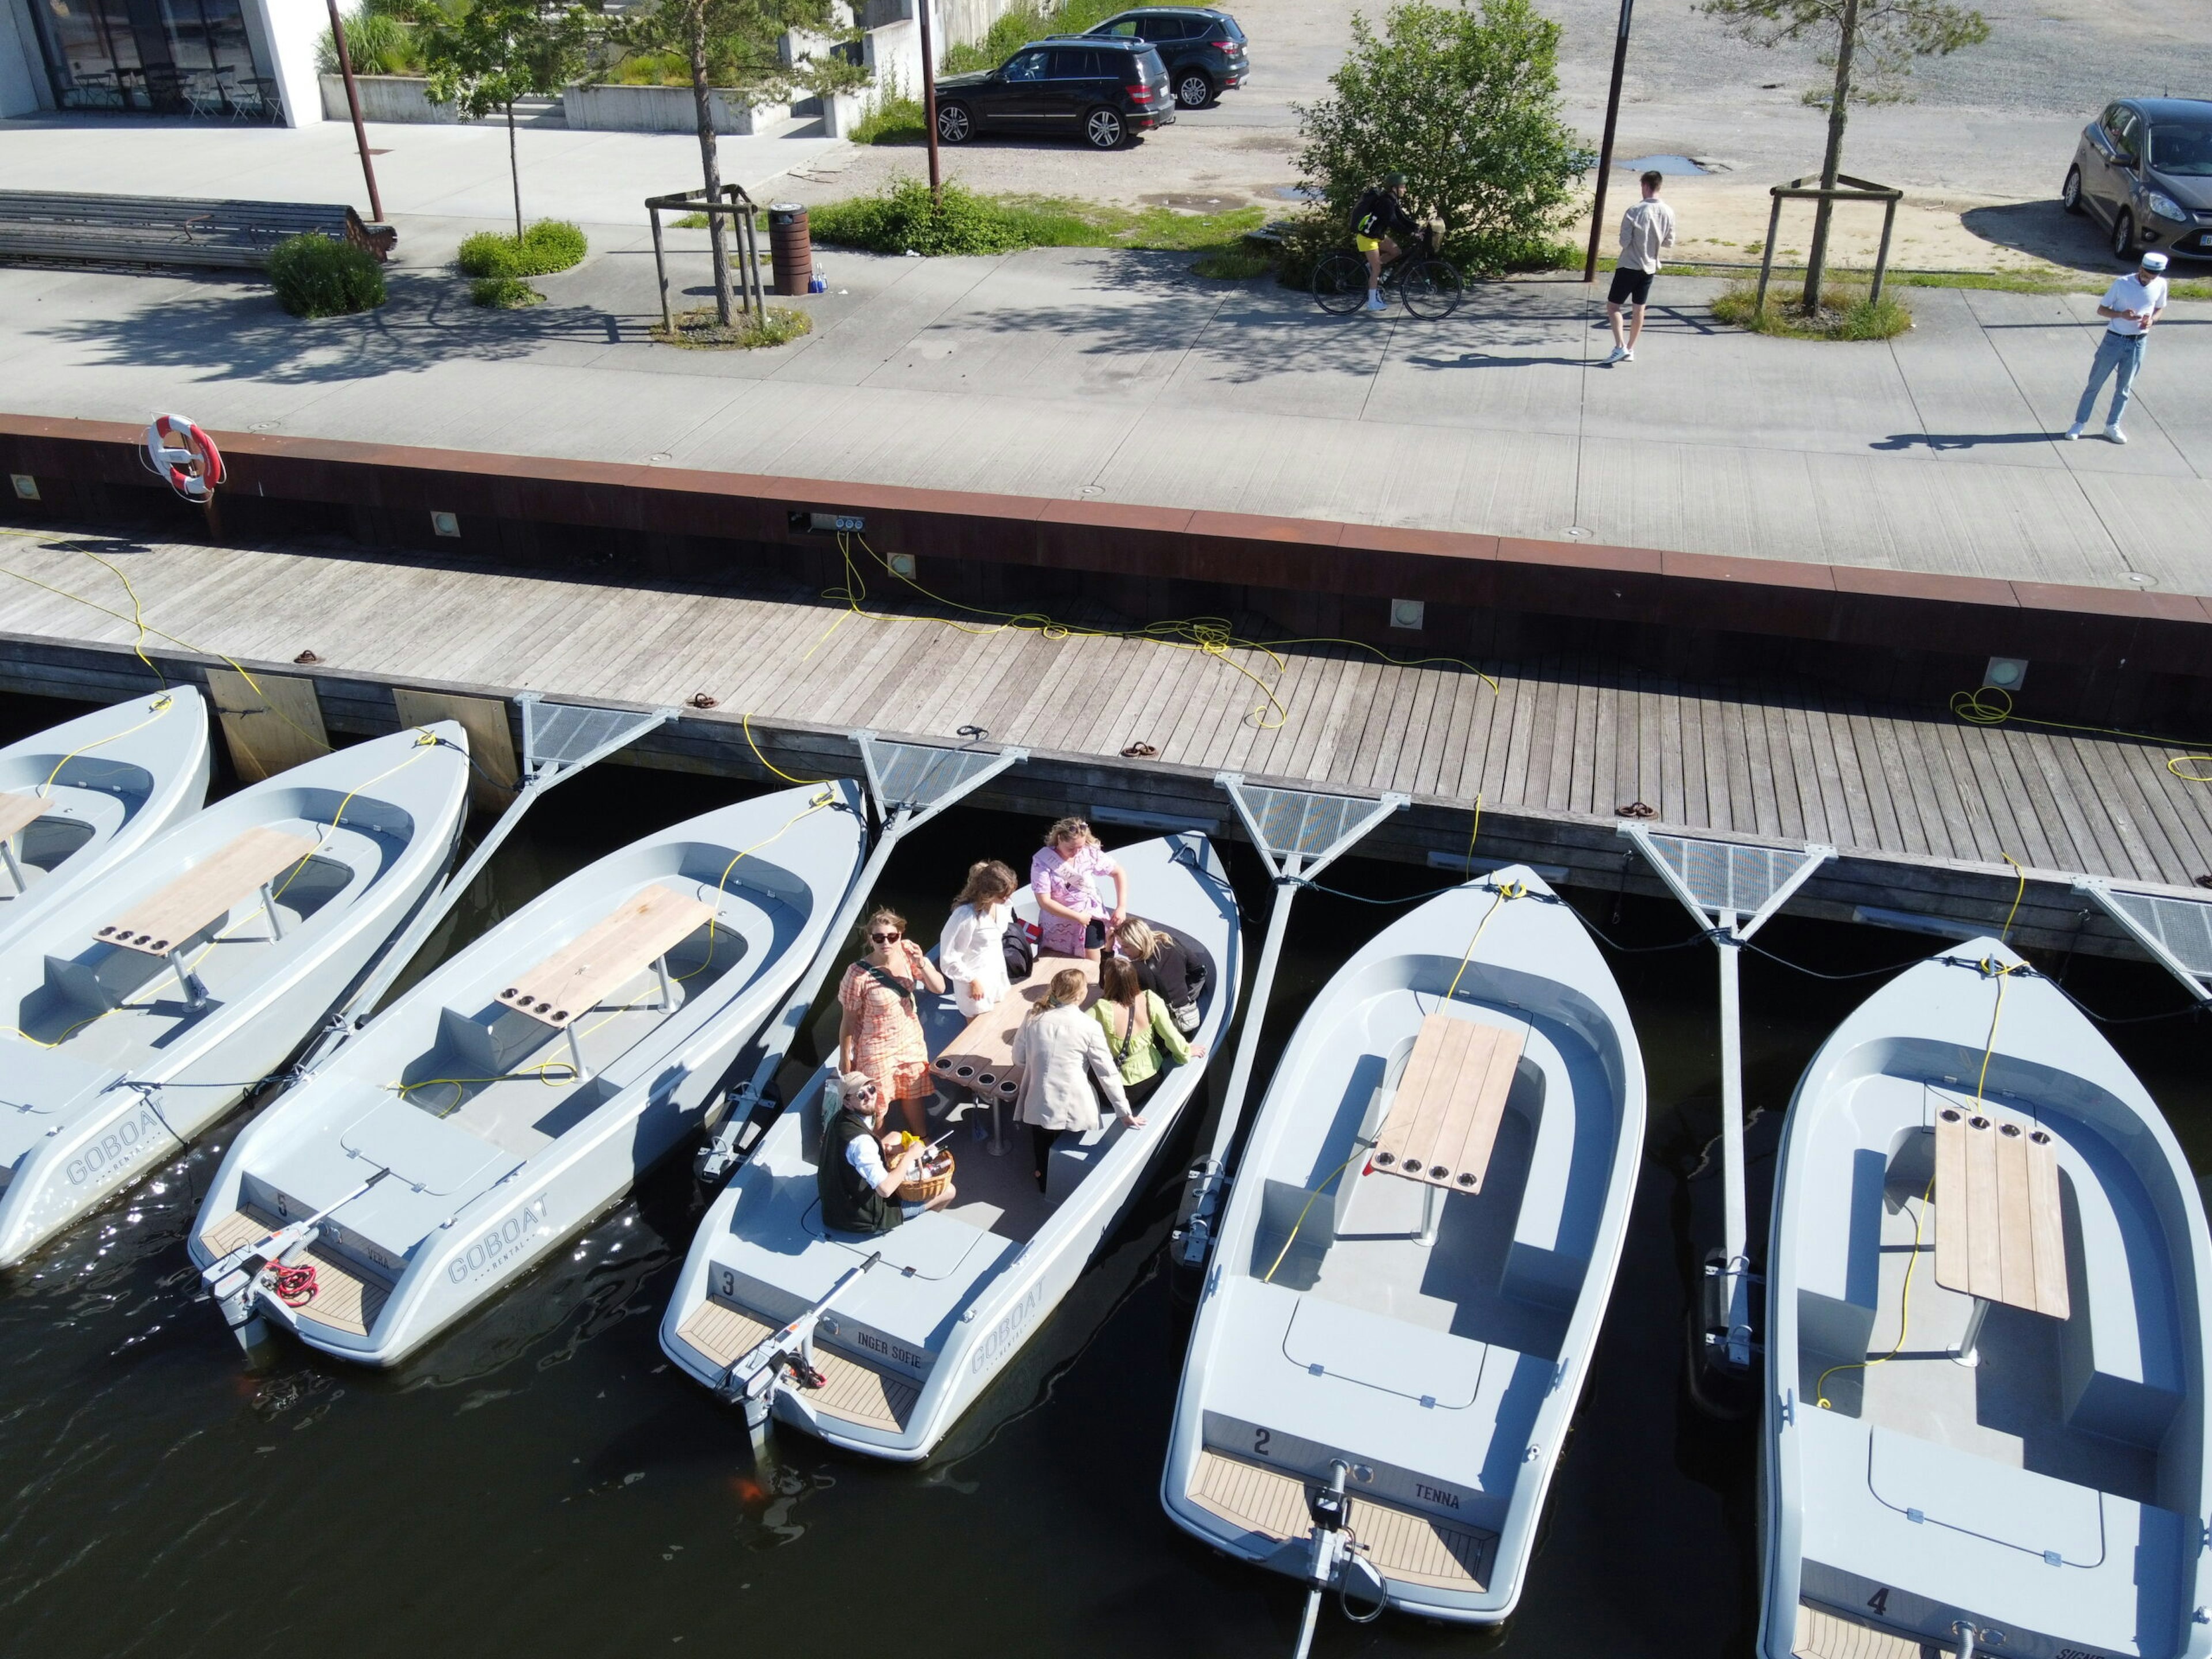 GoBoat Odense drone